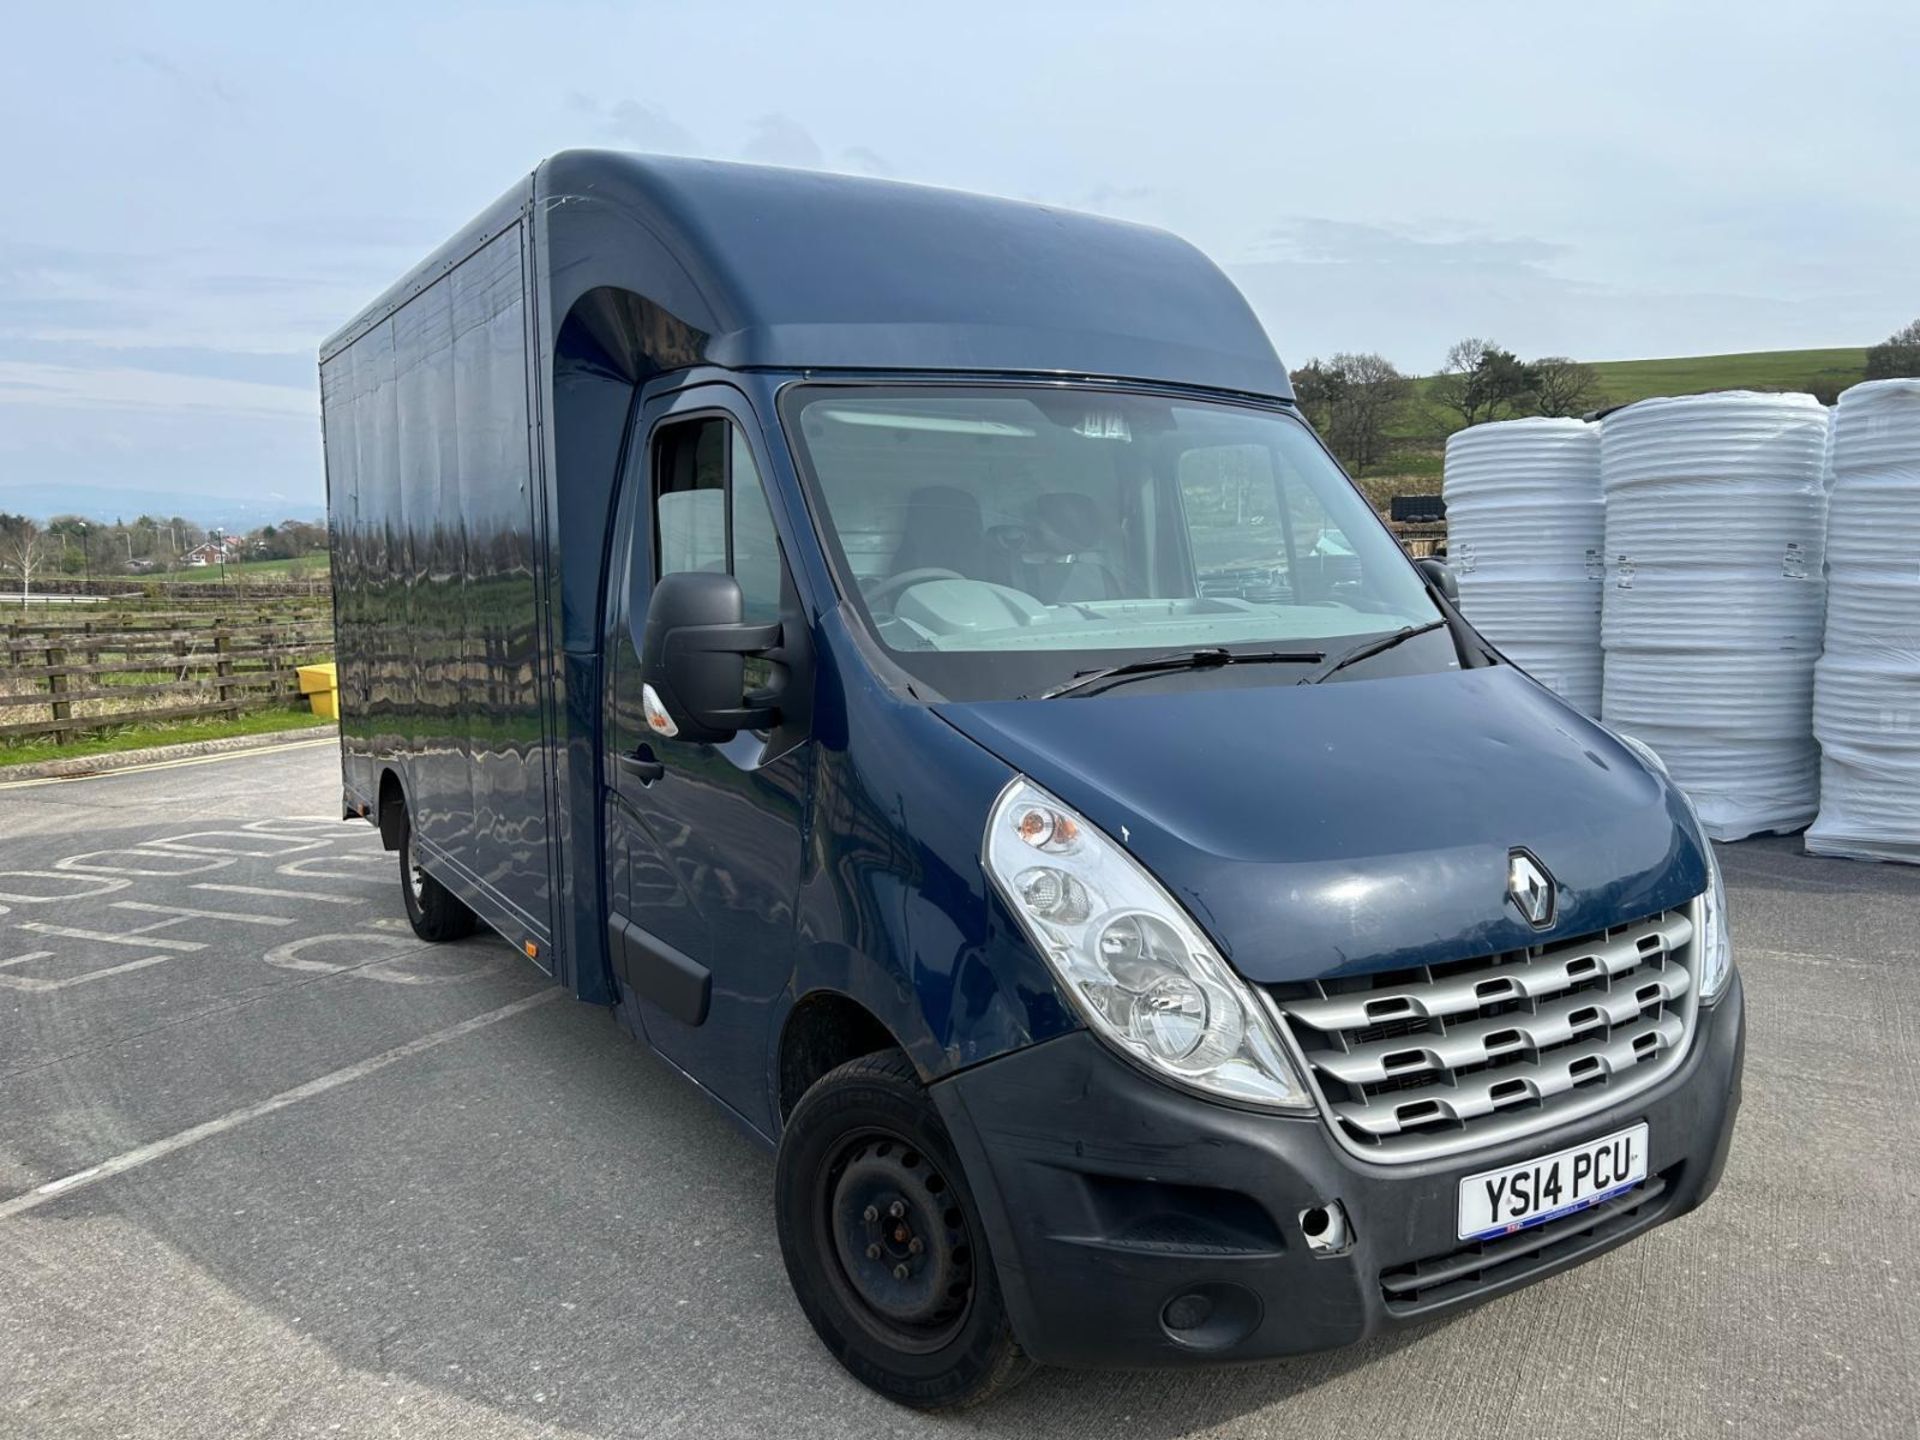 2014 RENAULT MASTER- 140K MILES - HPI CLEAR - READY FOR WORK!